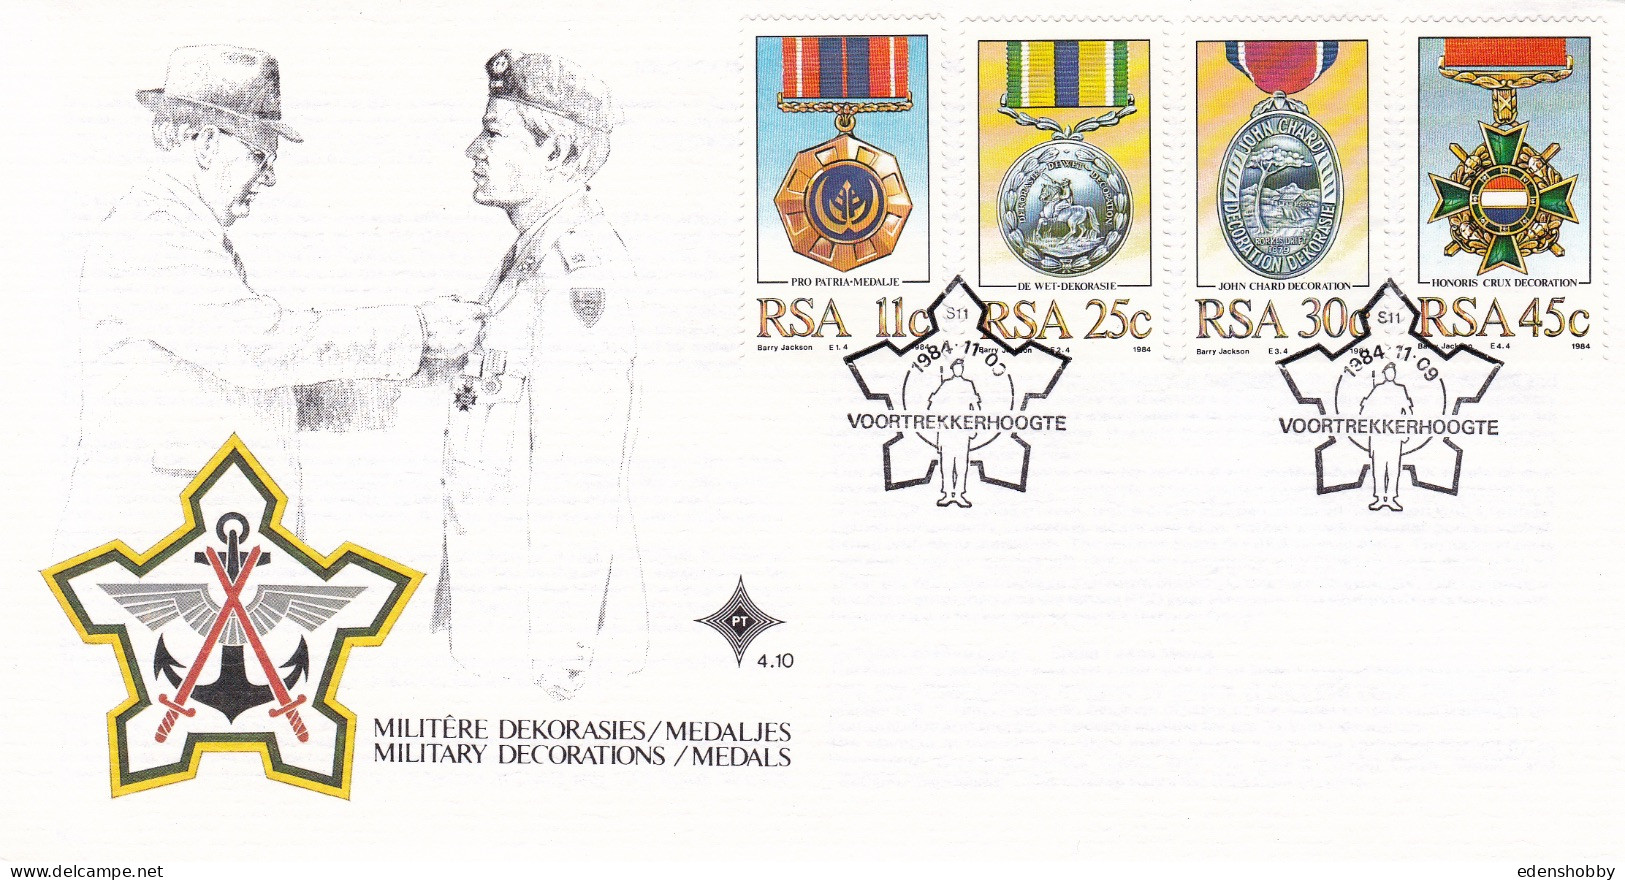 1984 SOUTH AFRICA RSA 7 Official First day Covers FDC 4.7, 4.8. 4.9, 4.9. 4.9a, 4.10, S12